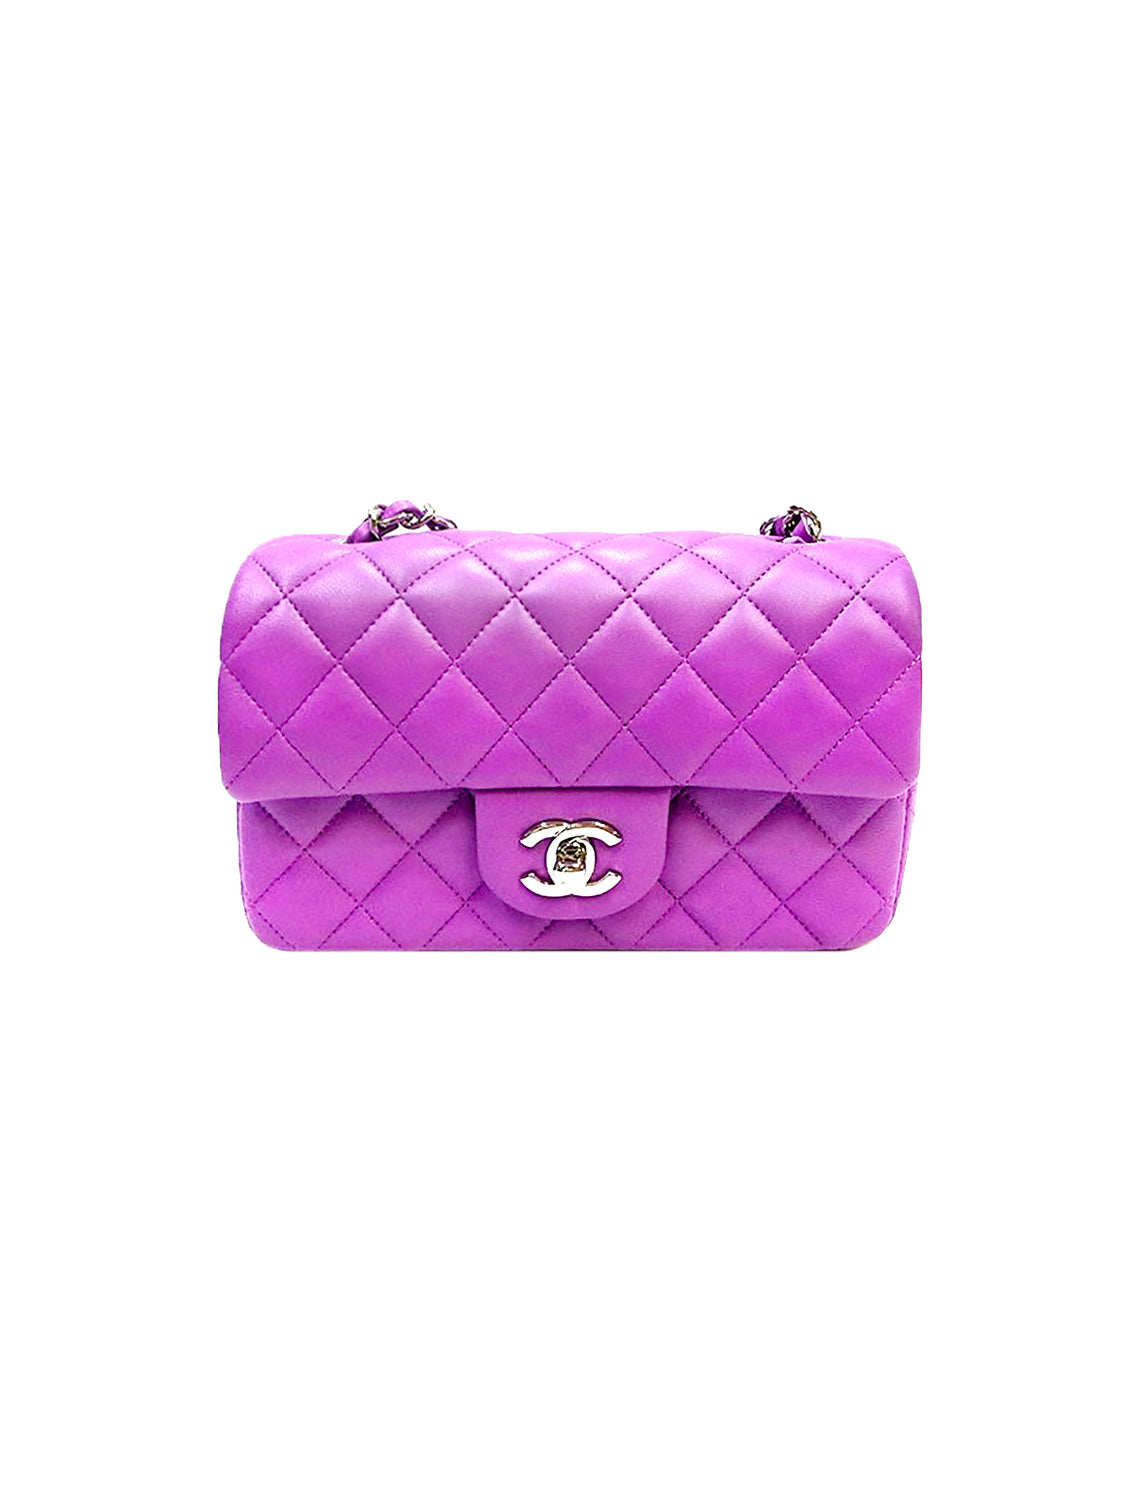 Authentic Chanel Purple Lambskin Mini Square Vanity with Gold Pearl Crush